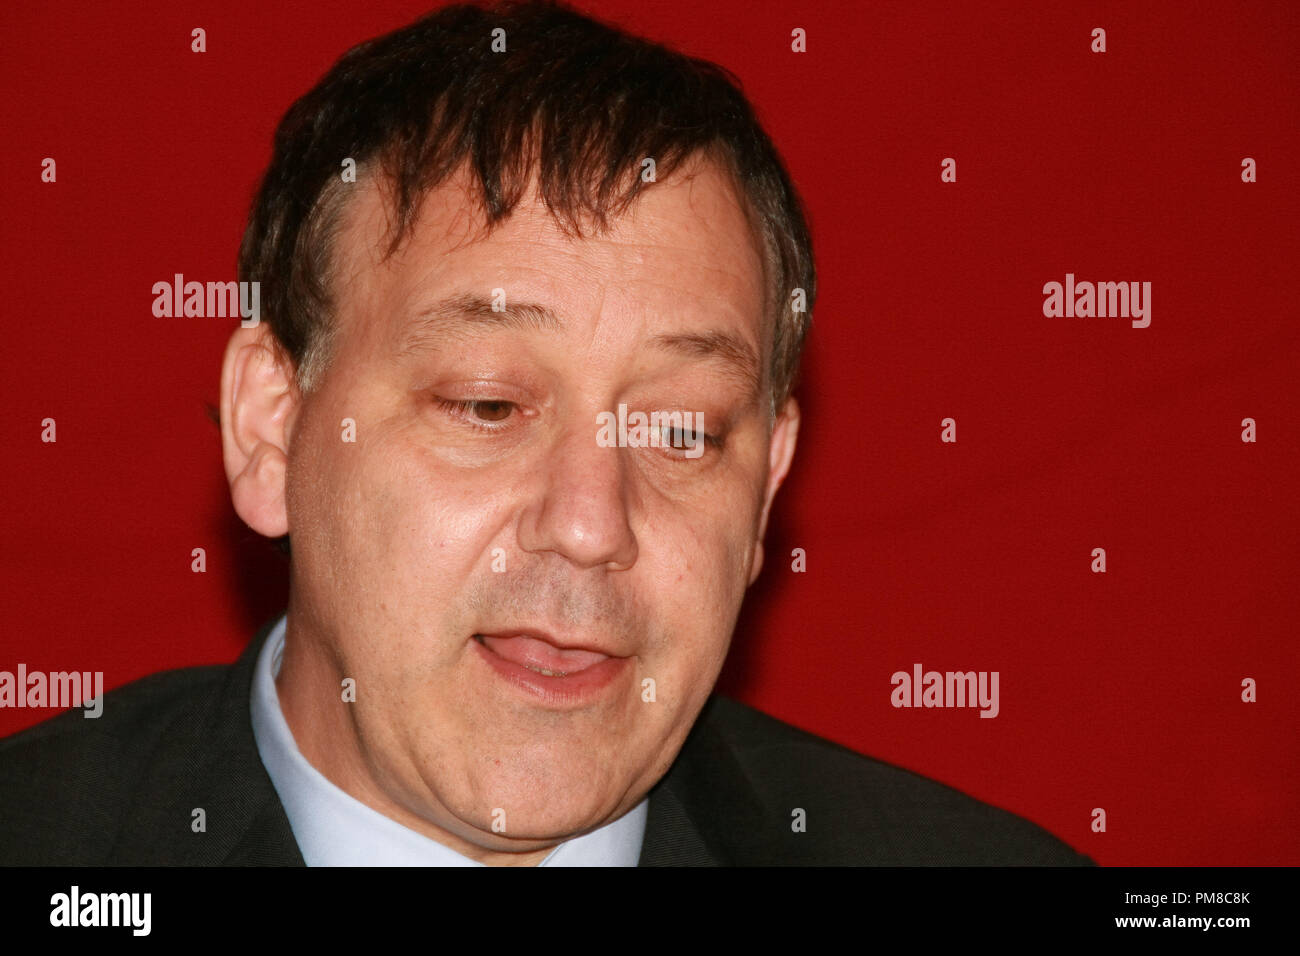 Sam Raimi Portrait "OZ the Great and Powerful" Portrait Session, February 15, 2013.  Reproduction by American tabloids is absolutely forbidden. File Reference # 31843_036JRC  For Editorial Use Only -  All Rights Reserved Stock Photo